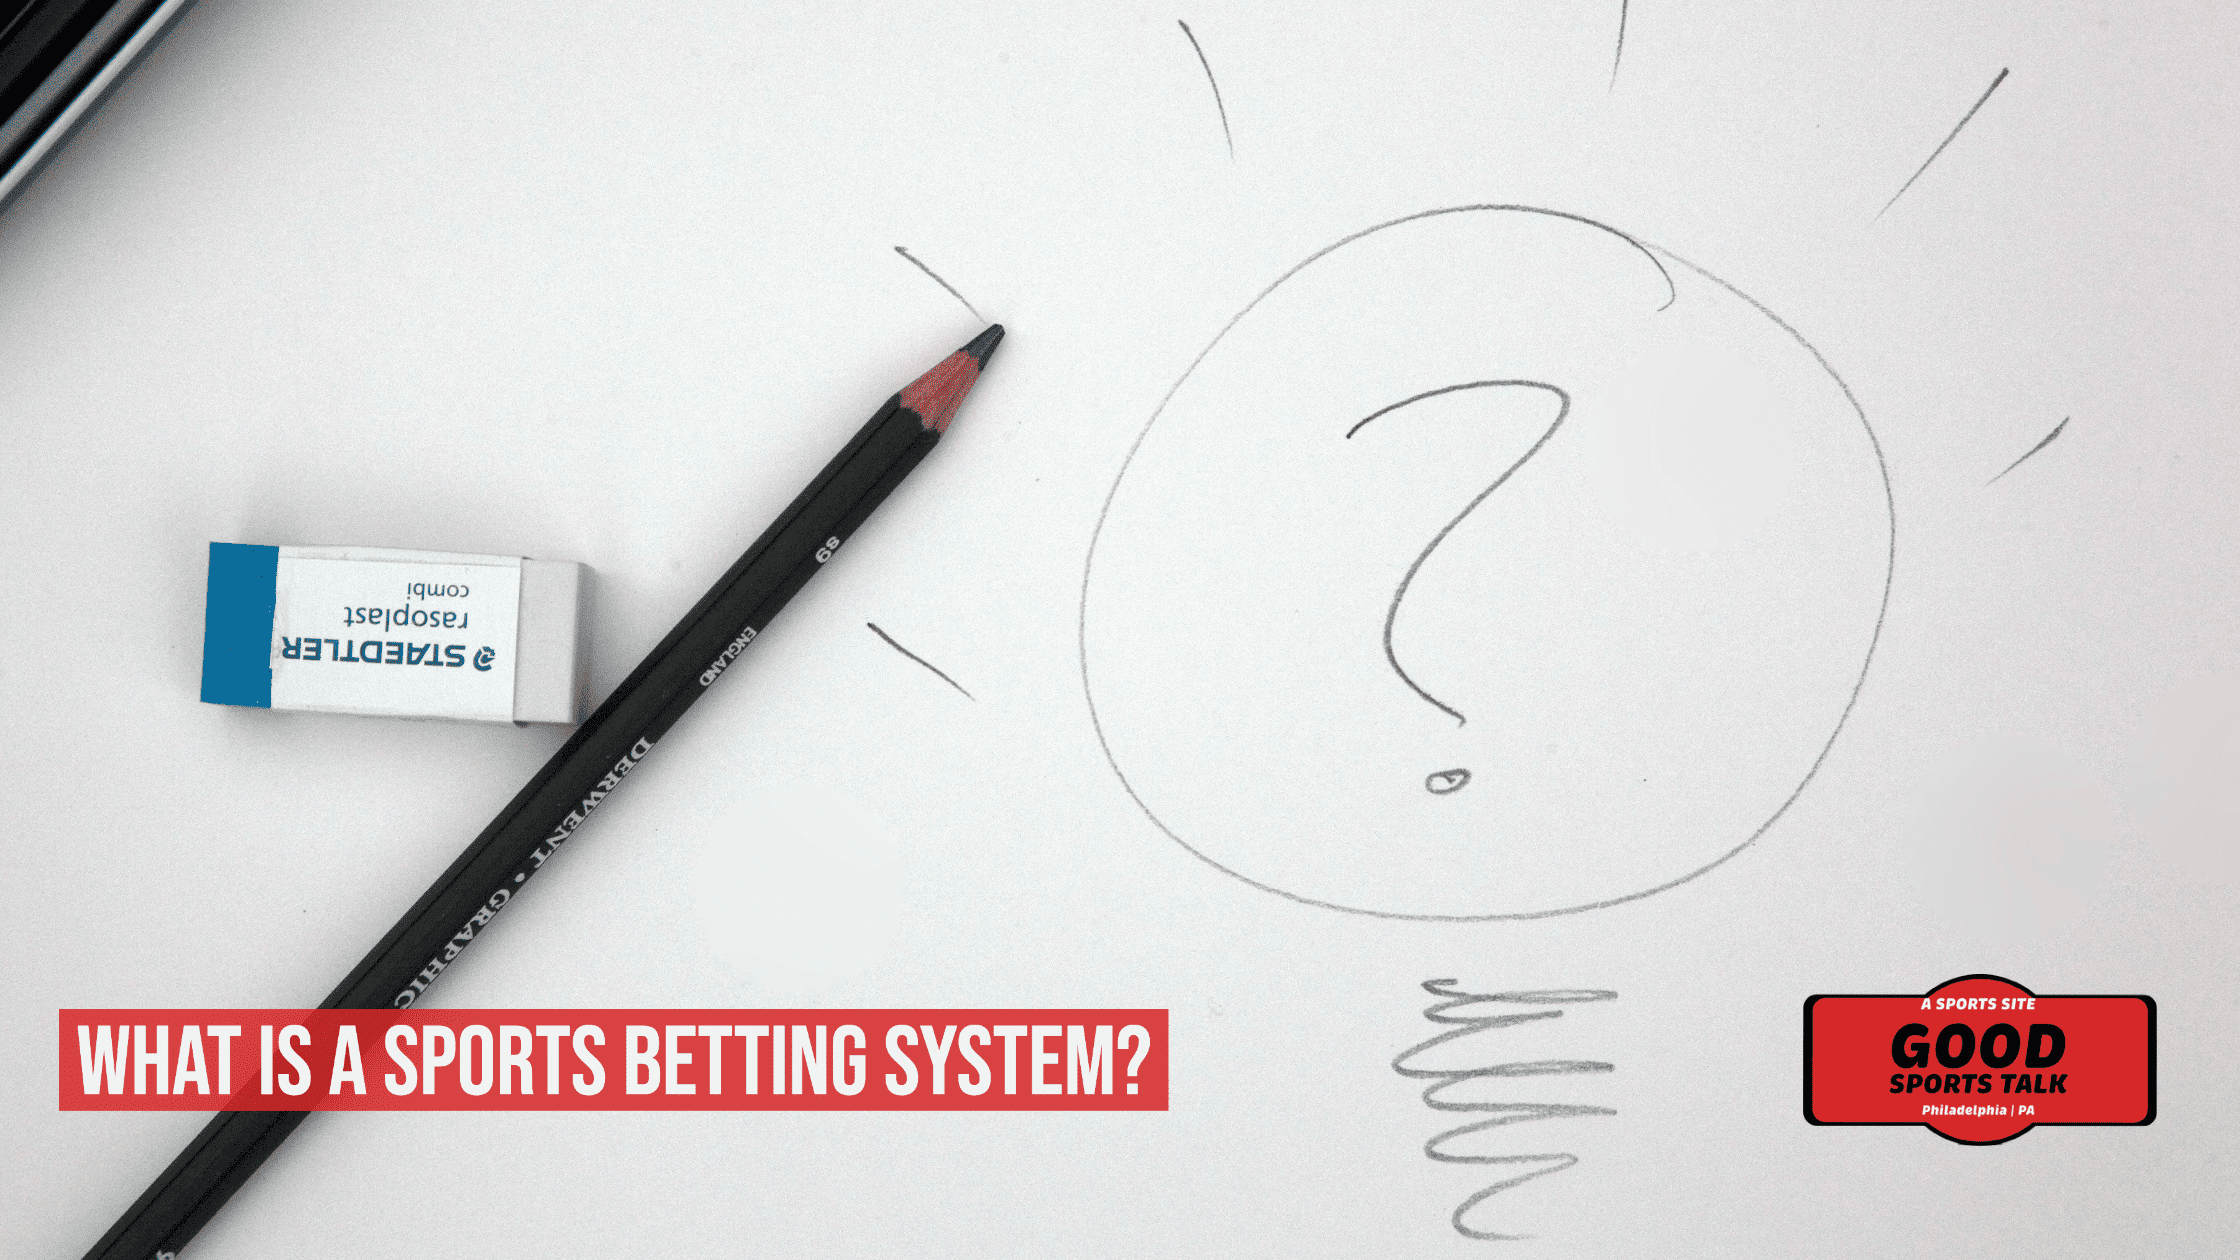 What is a Sports betting system?